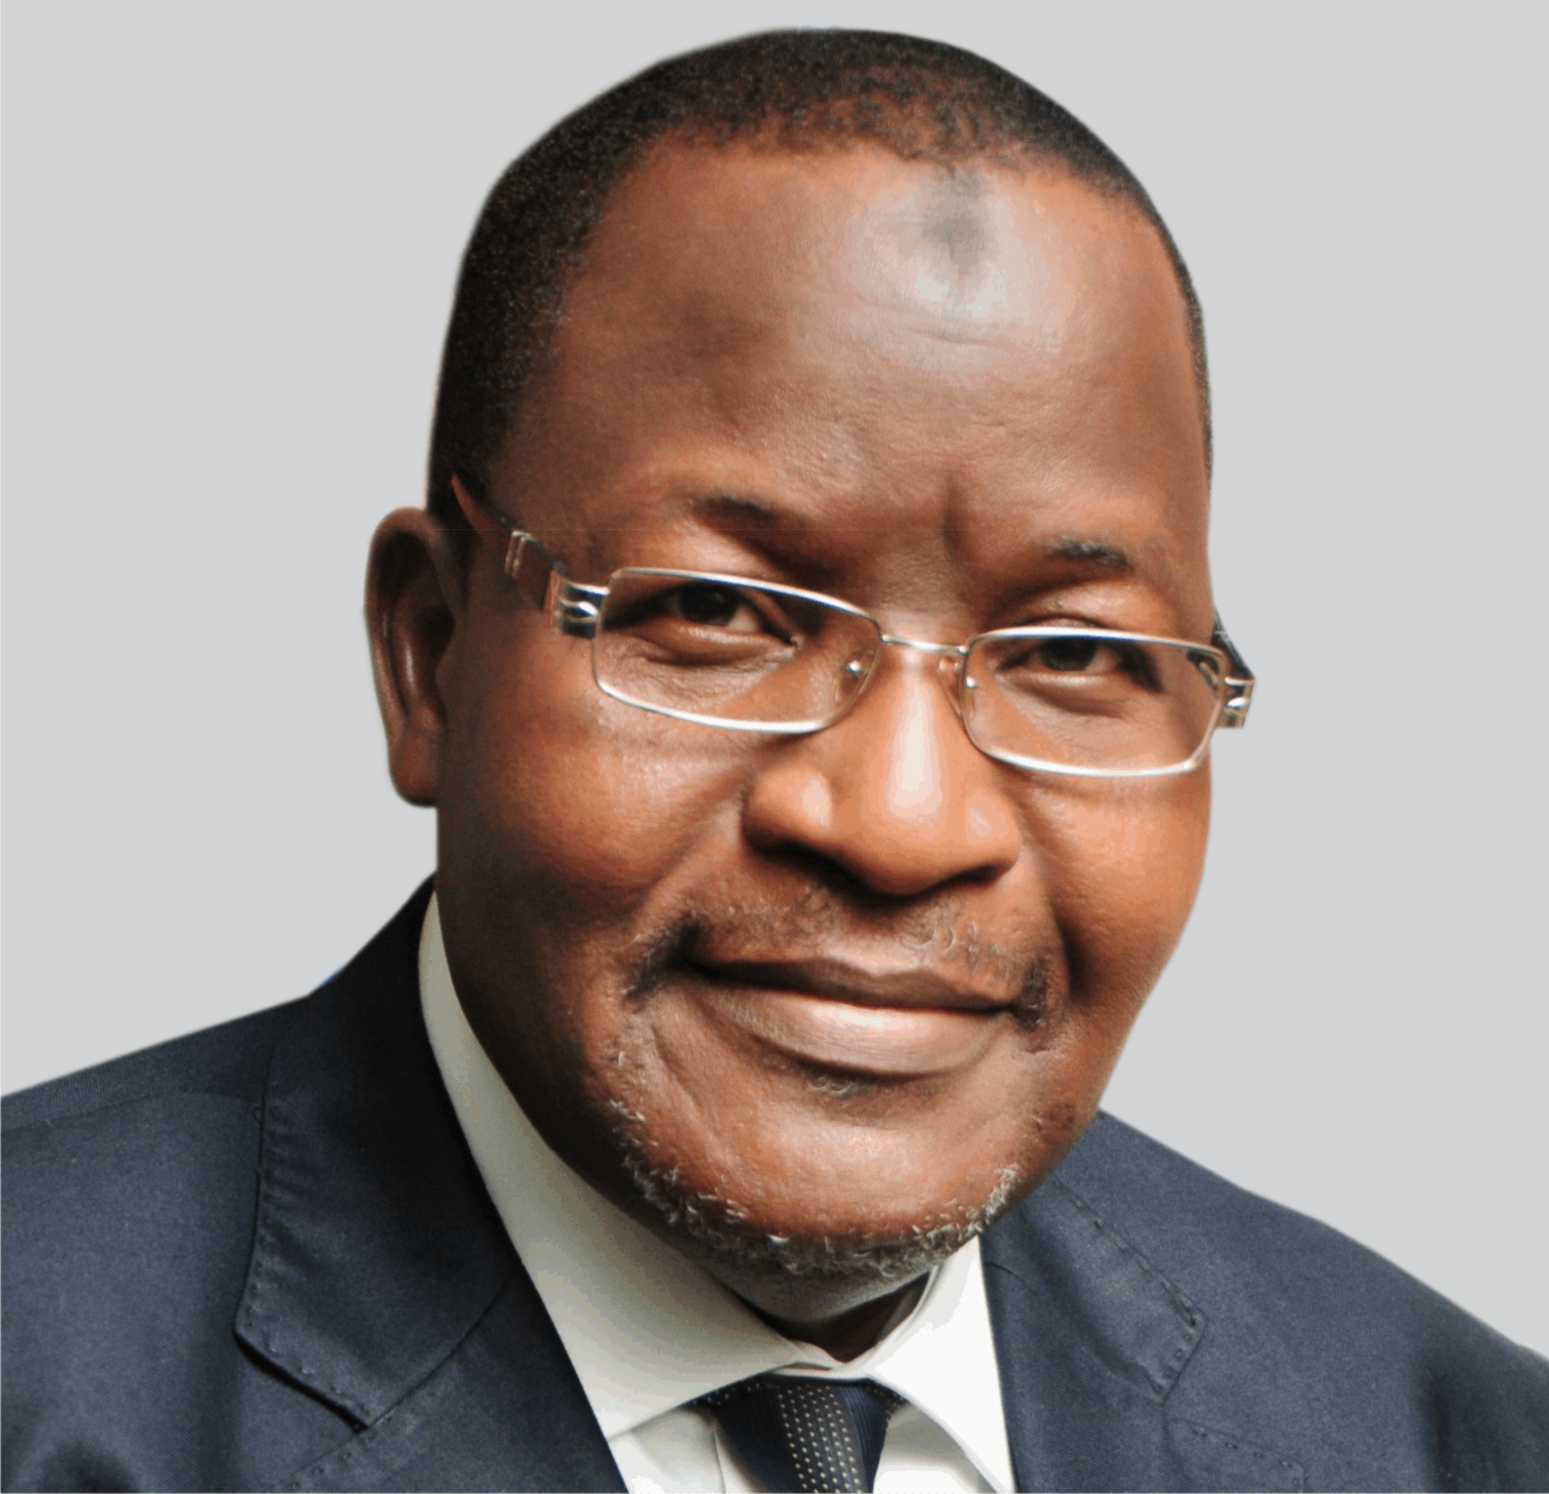 Operators Accuse NCC Of Monopoly Over Long Numbers